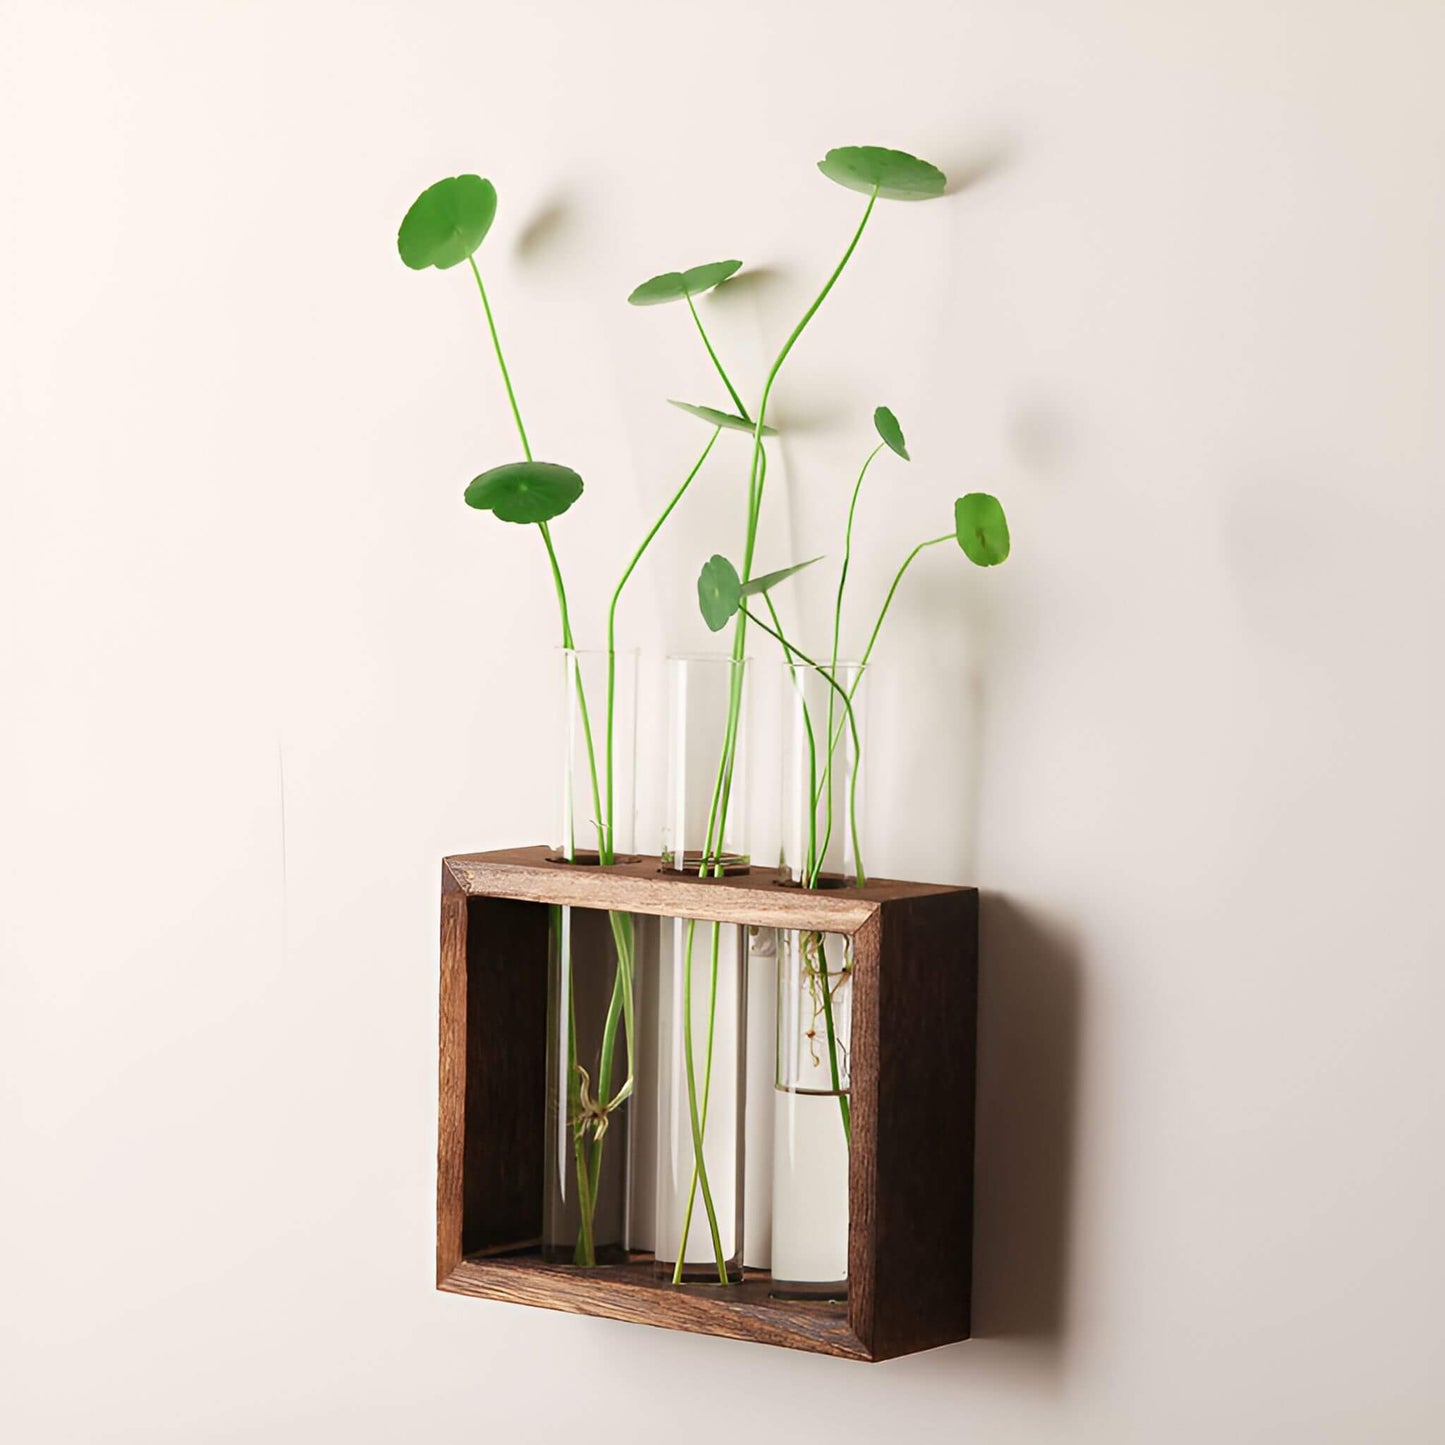 PlantVue Holder: Stylish And Simple Plant Propagation Station and Terrarium